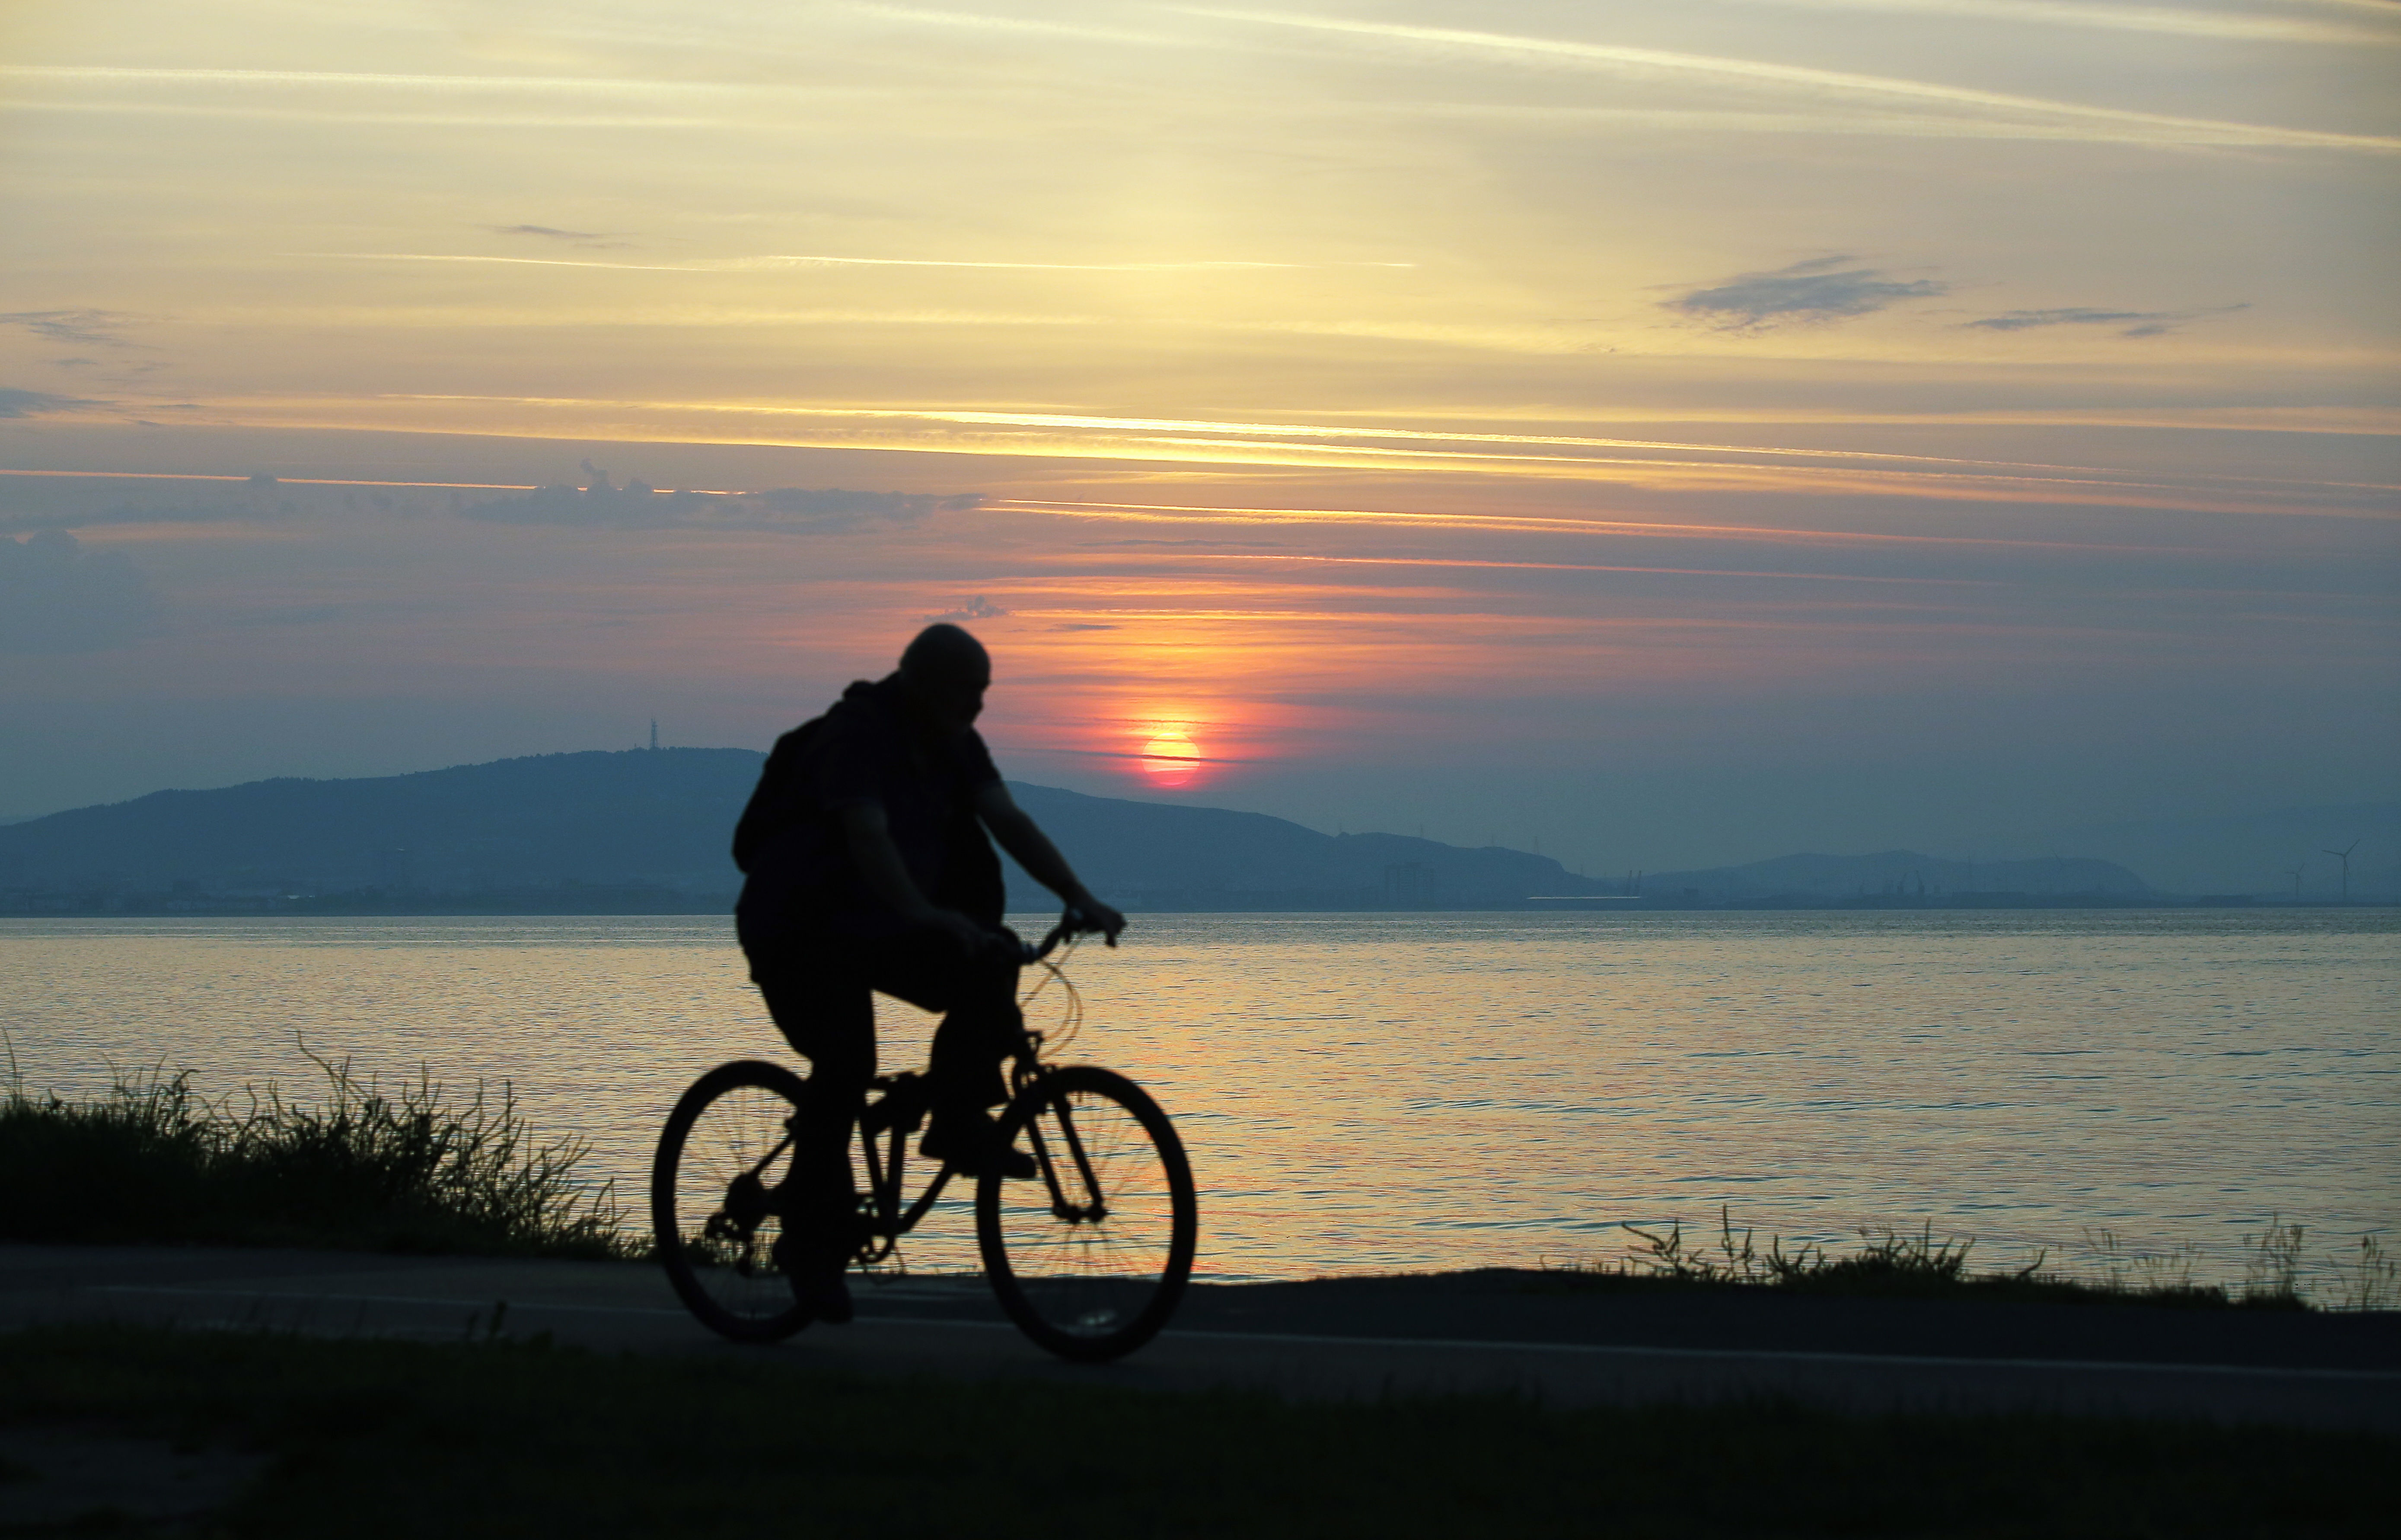 Pictured: A cyclist travels on the Oystermouth path as the sun rises over Kilvey Hill in Swansea, as seen from West Cross in south Wales, UK. Wednesday 21 June 2017 Re: Summer Solstice